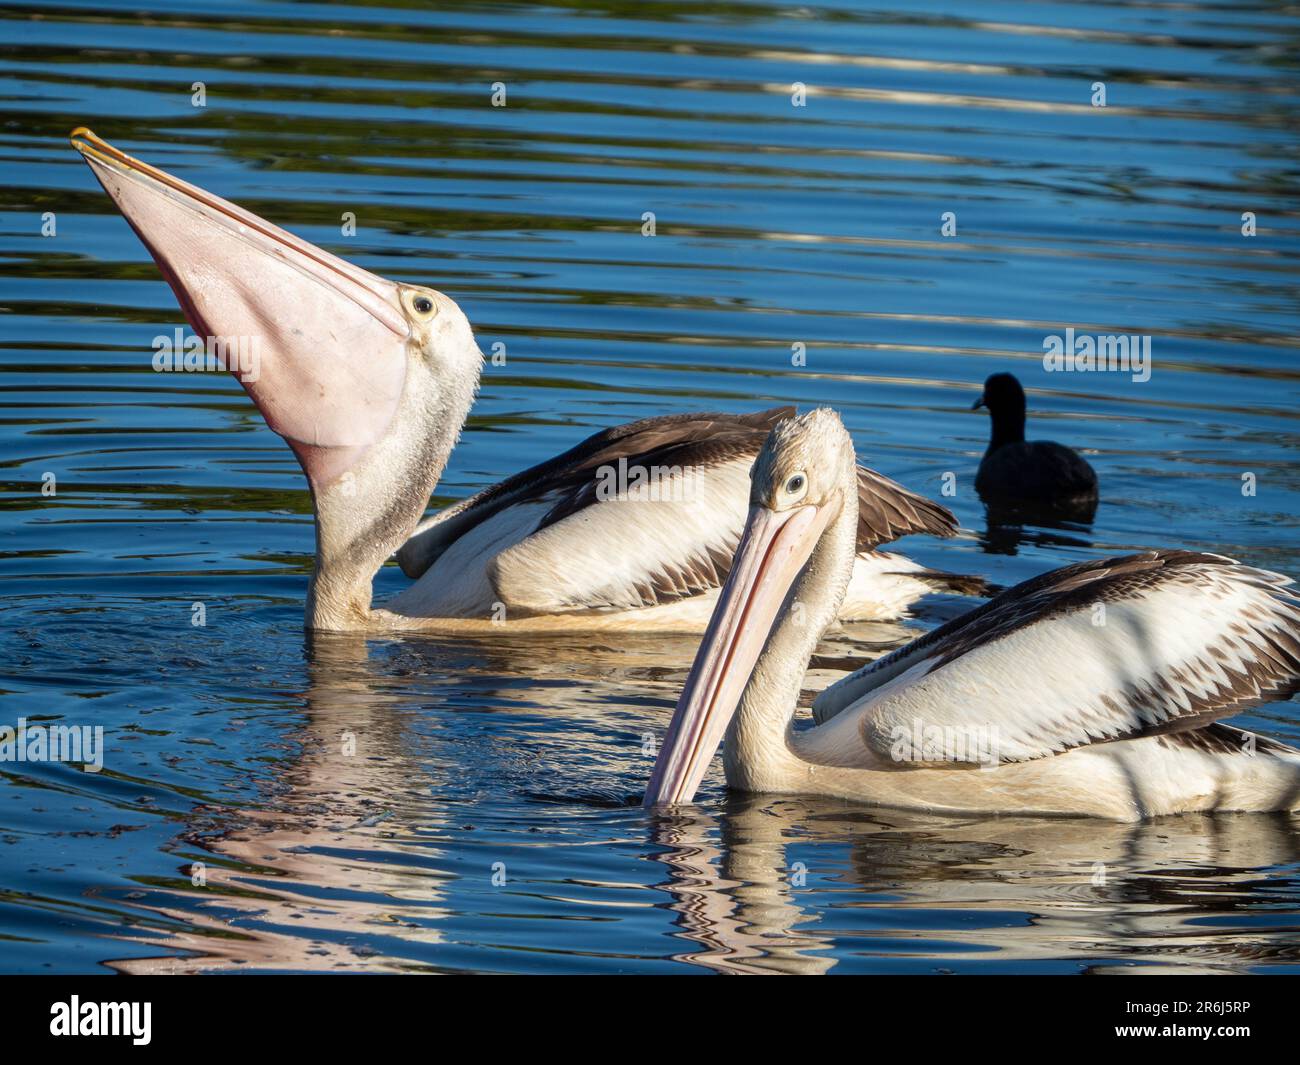 Two large Australian Pelicans floating and feeding reflected in rippled lake water, one swallowing something in its pink throat pouch, Australia Stock Photo